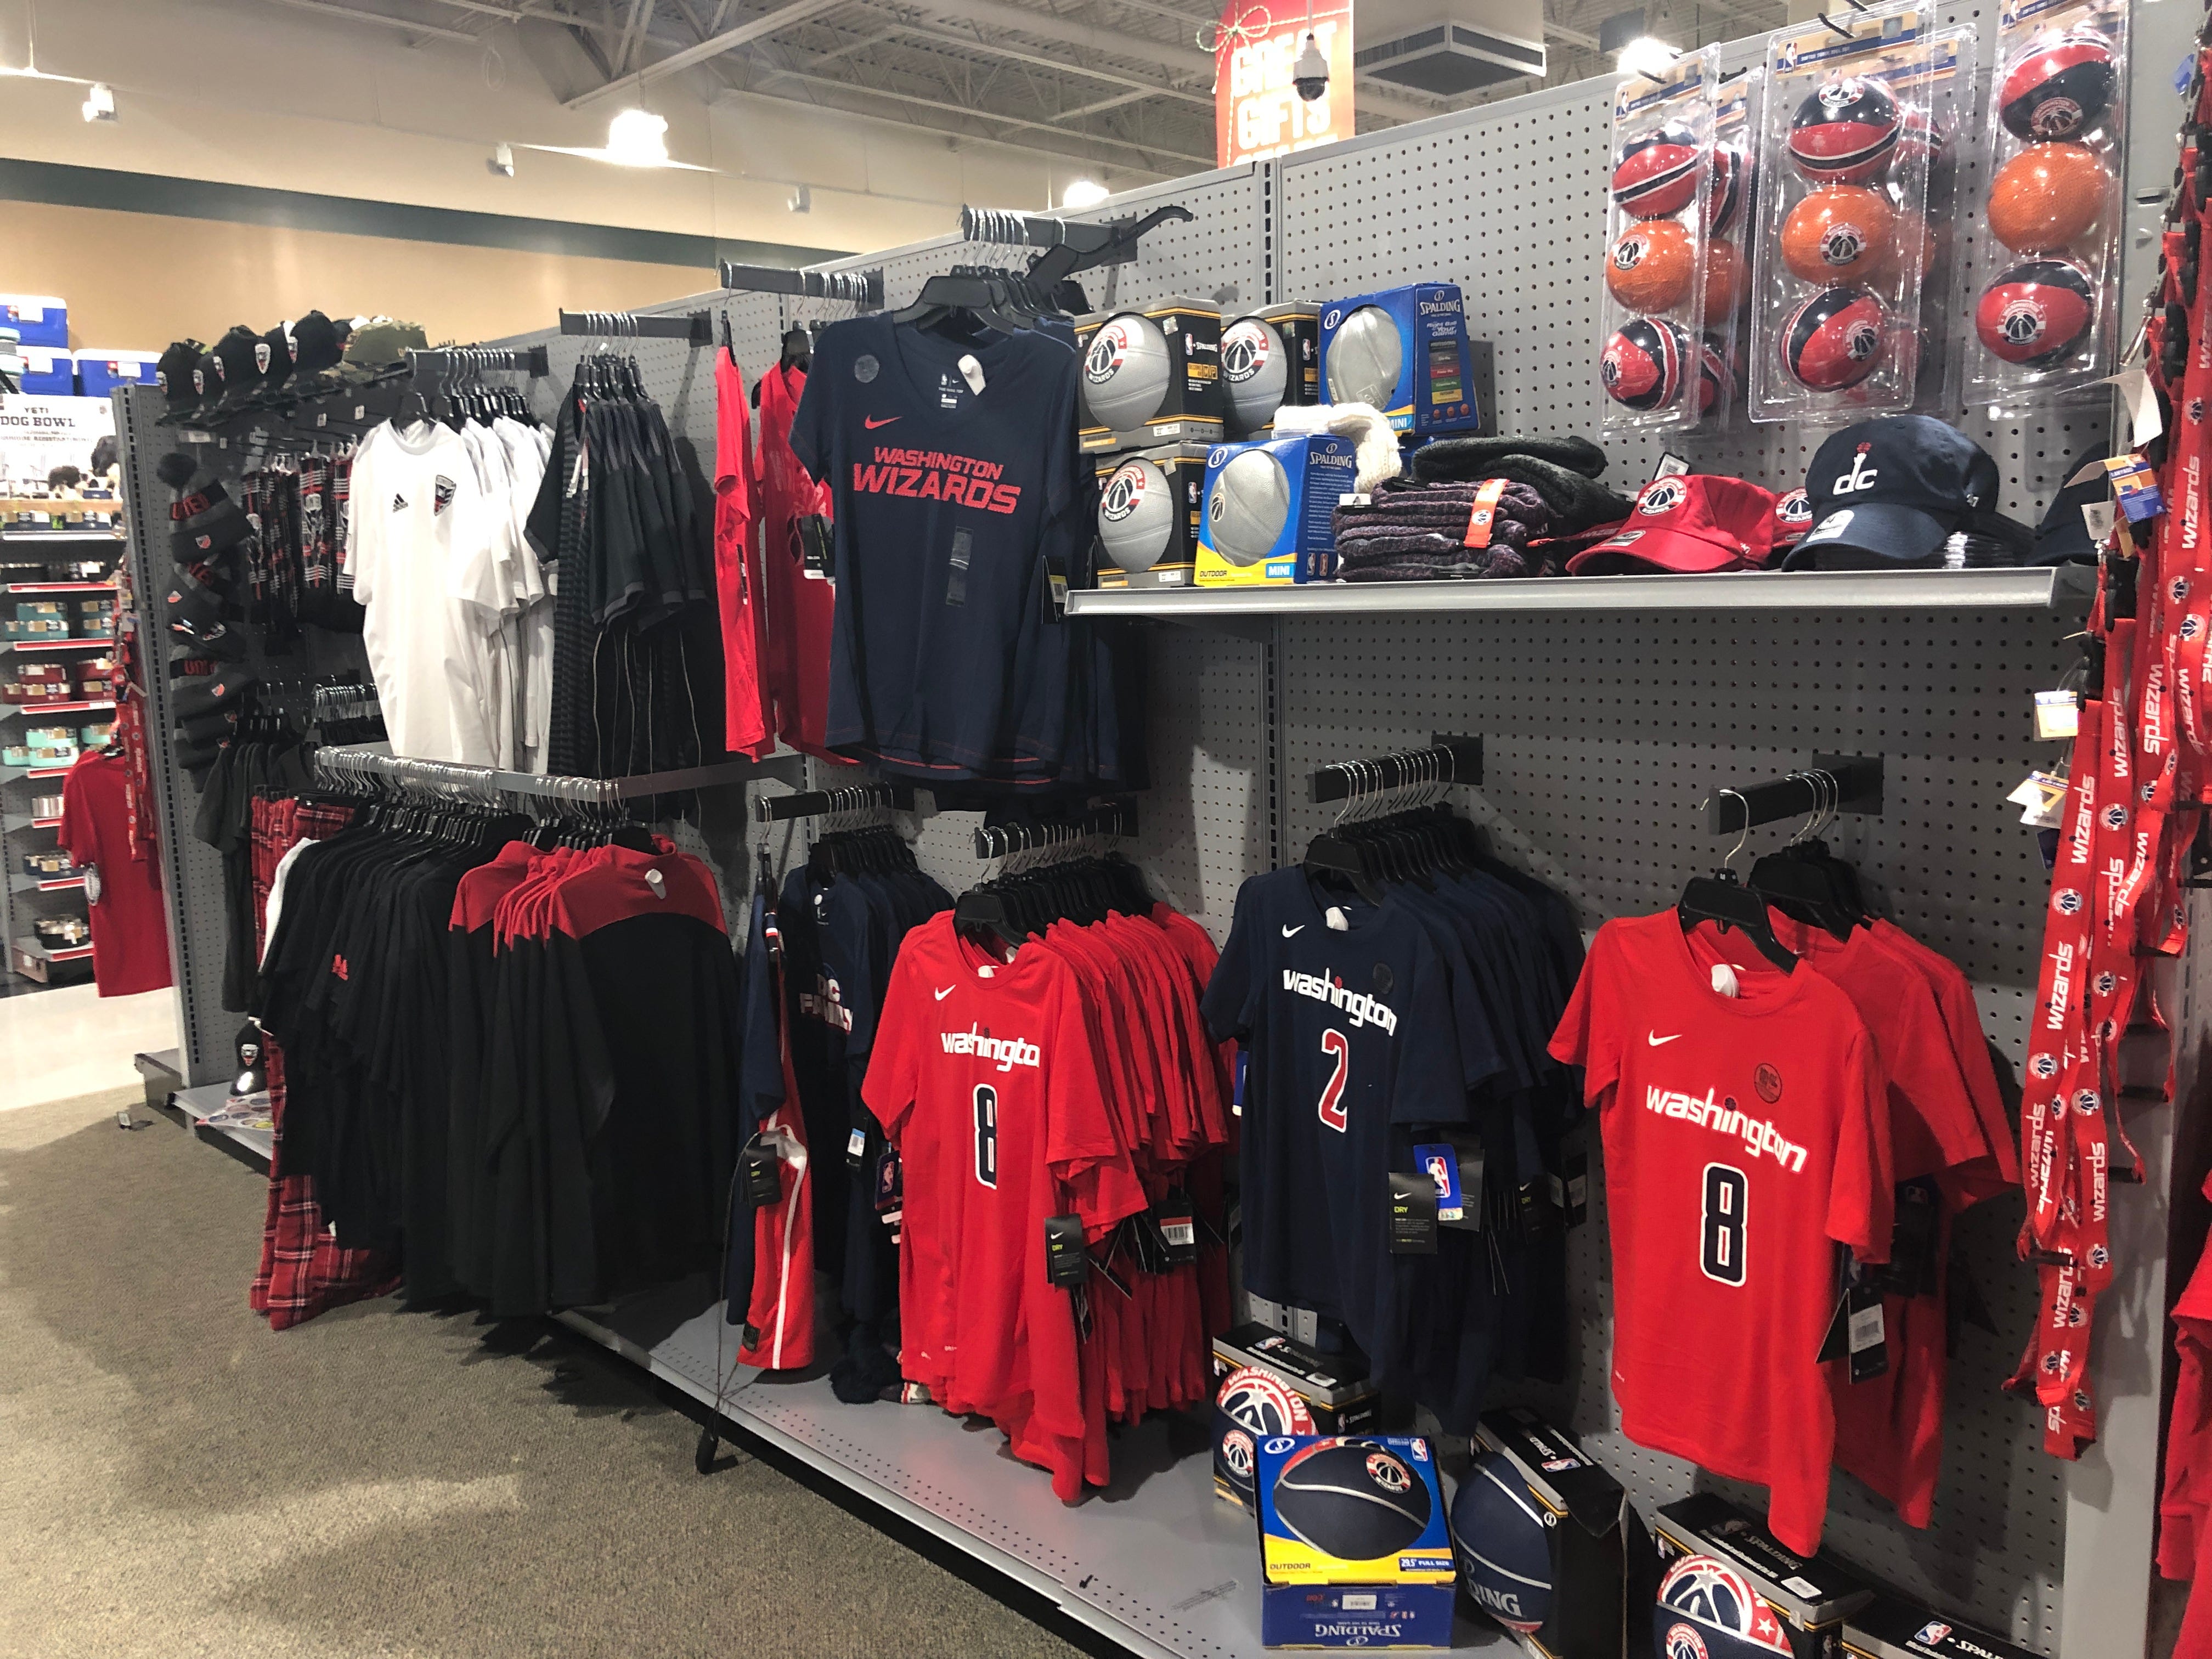 Our Team Shop at Capital One Arena - Washington Wizards